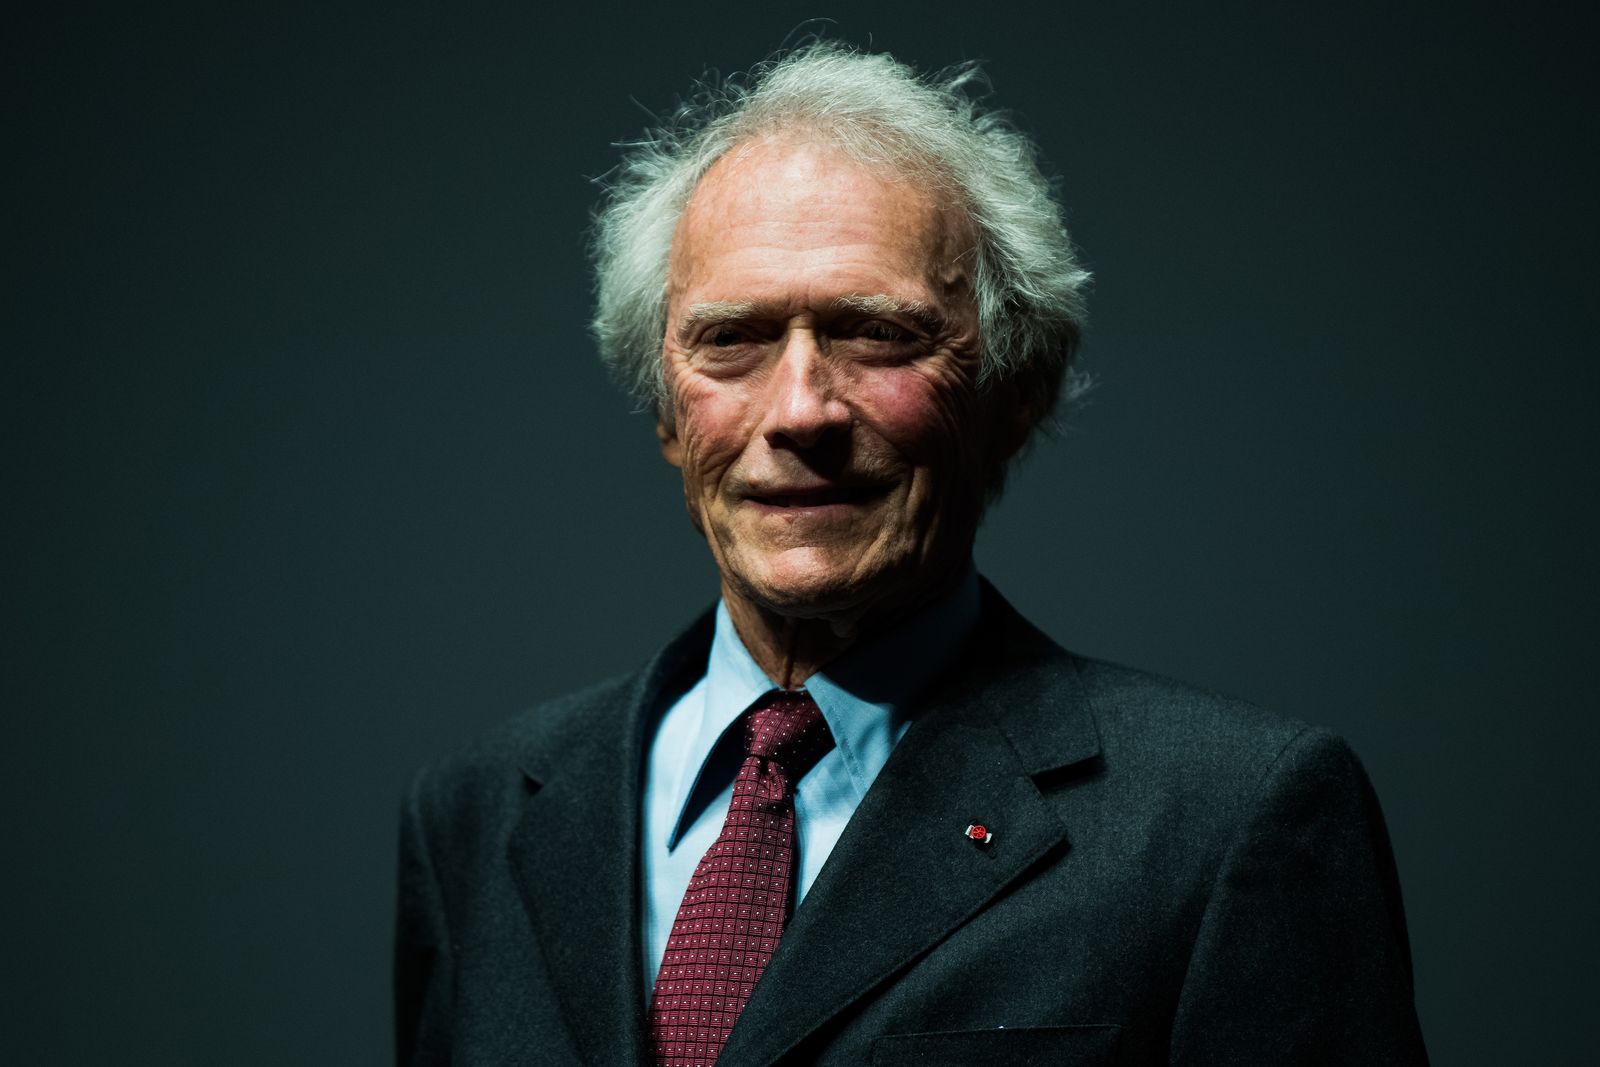 Clint Eastwood Is a Proud Grandfather Meet 5 Grandkids of the